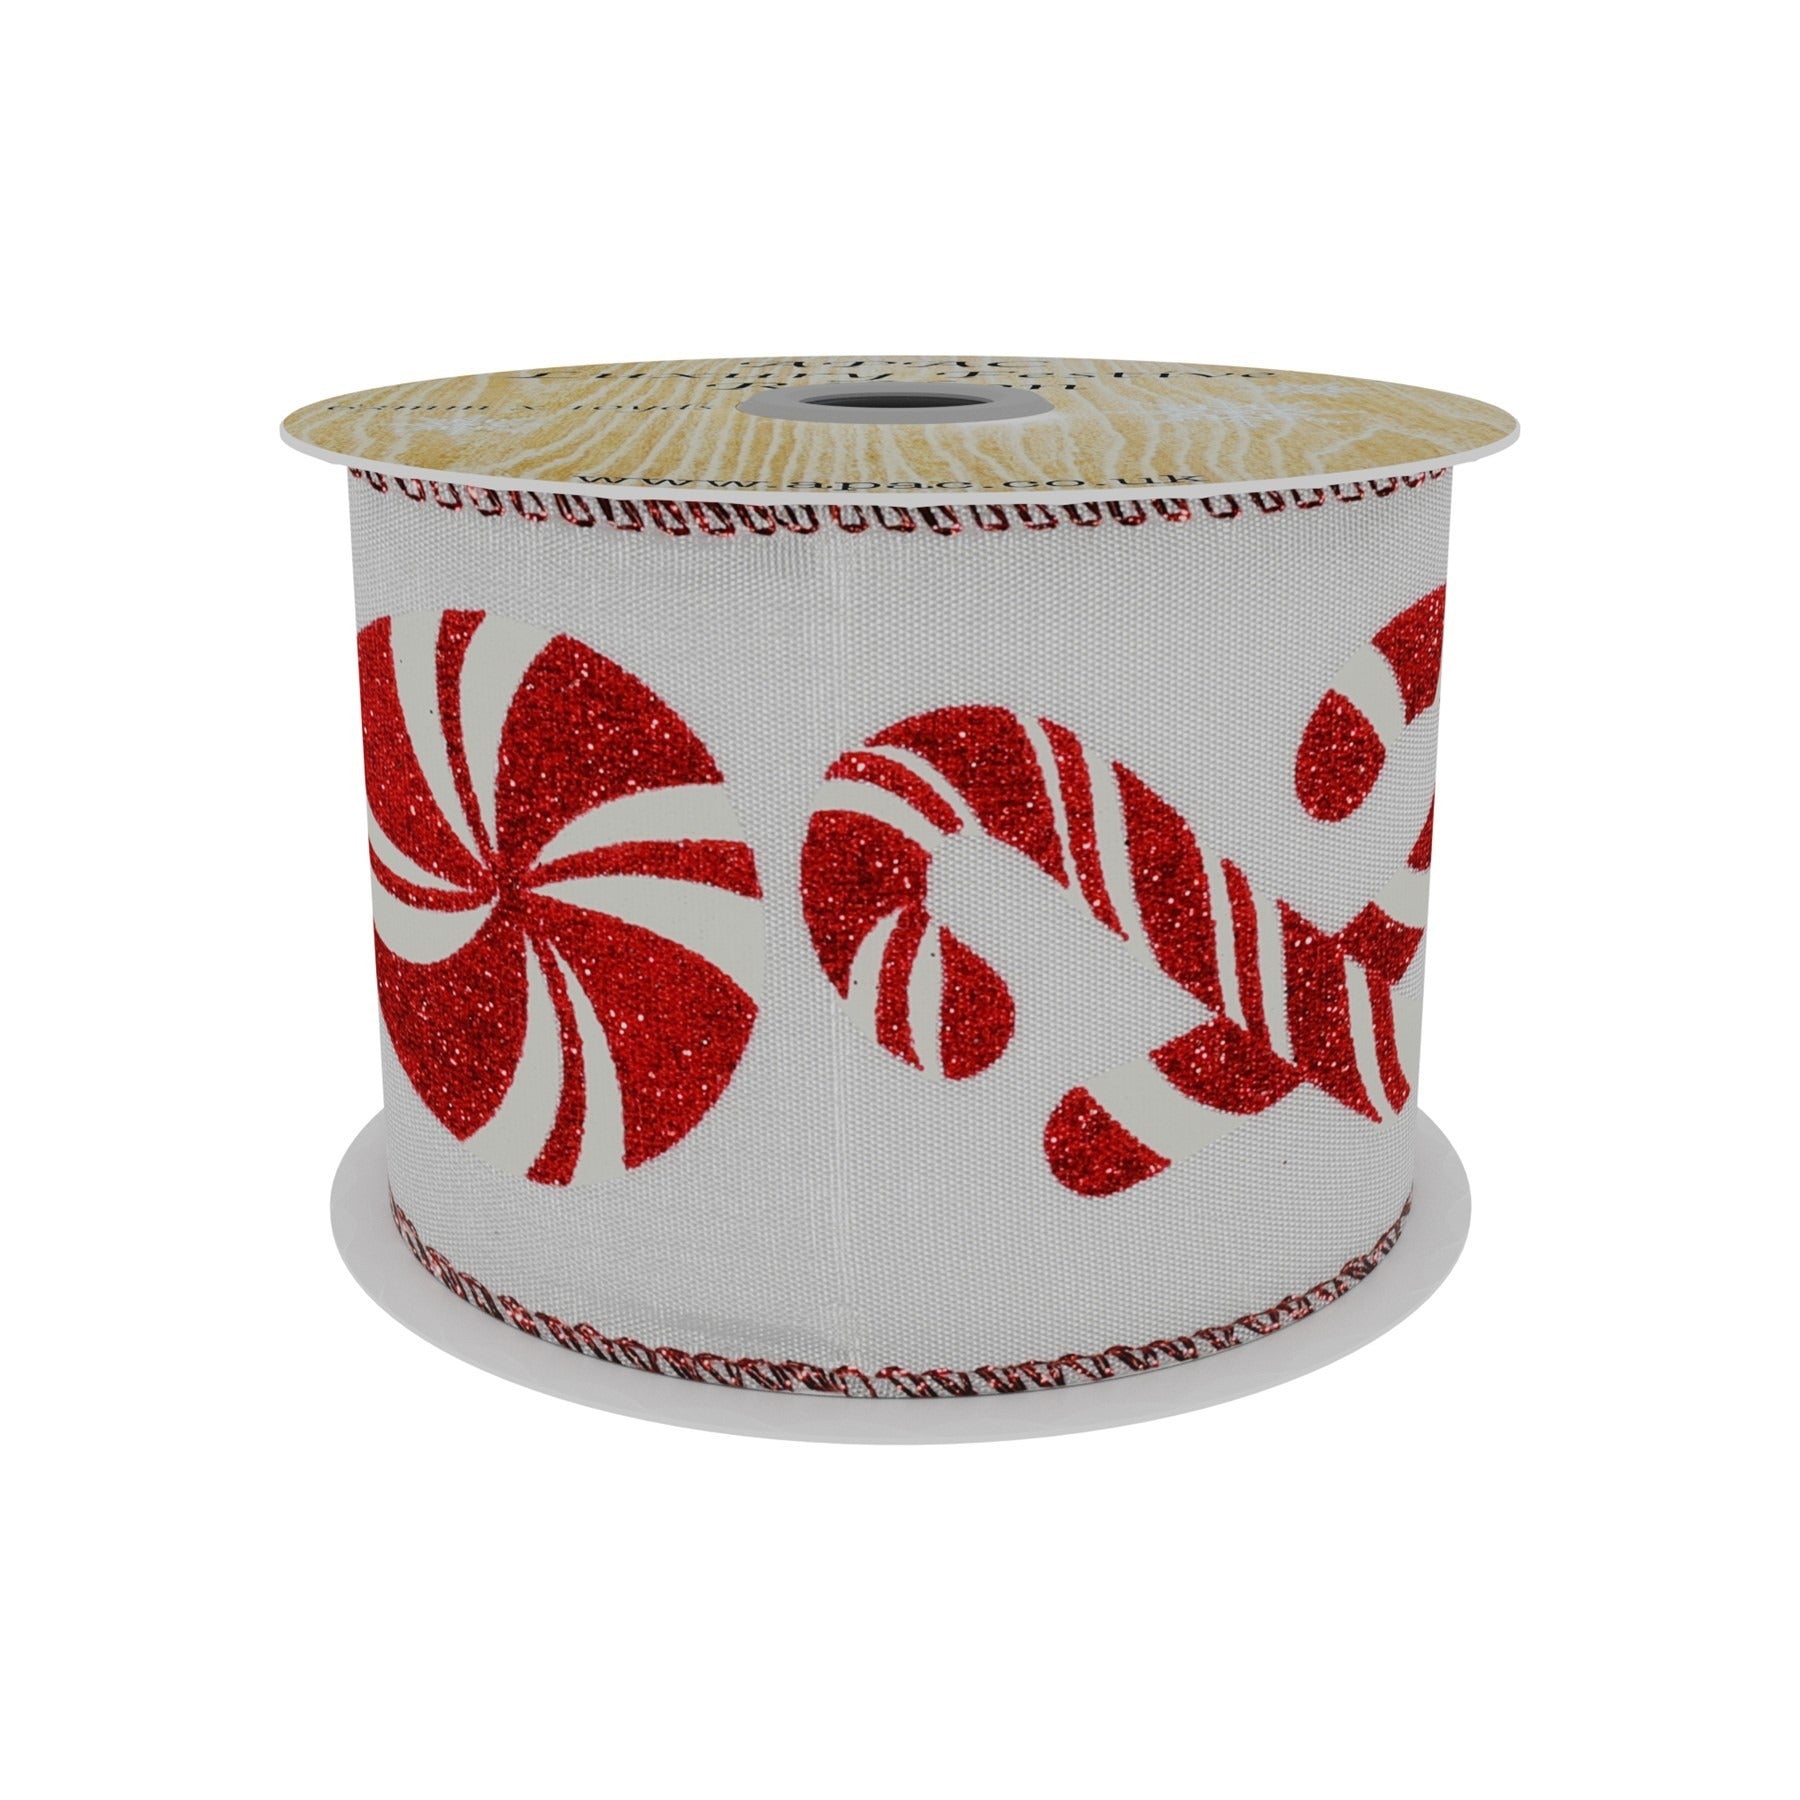 View Taffeta Ribbon with Red and White Candy Cane Pattern 63mm x 9m information